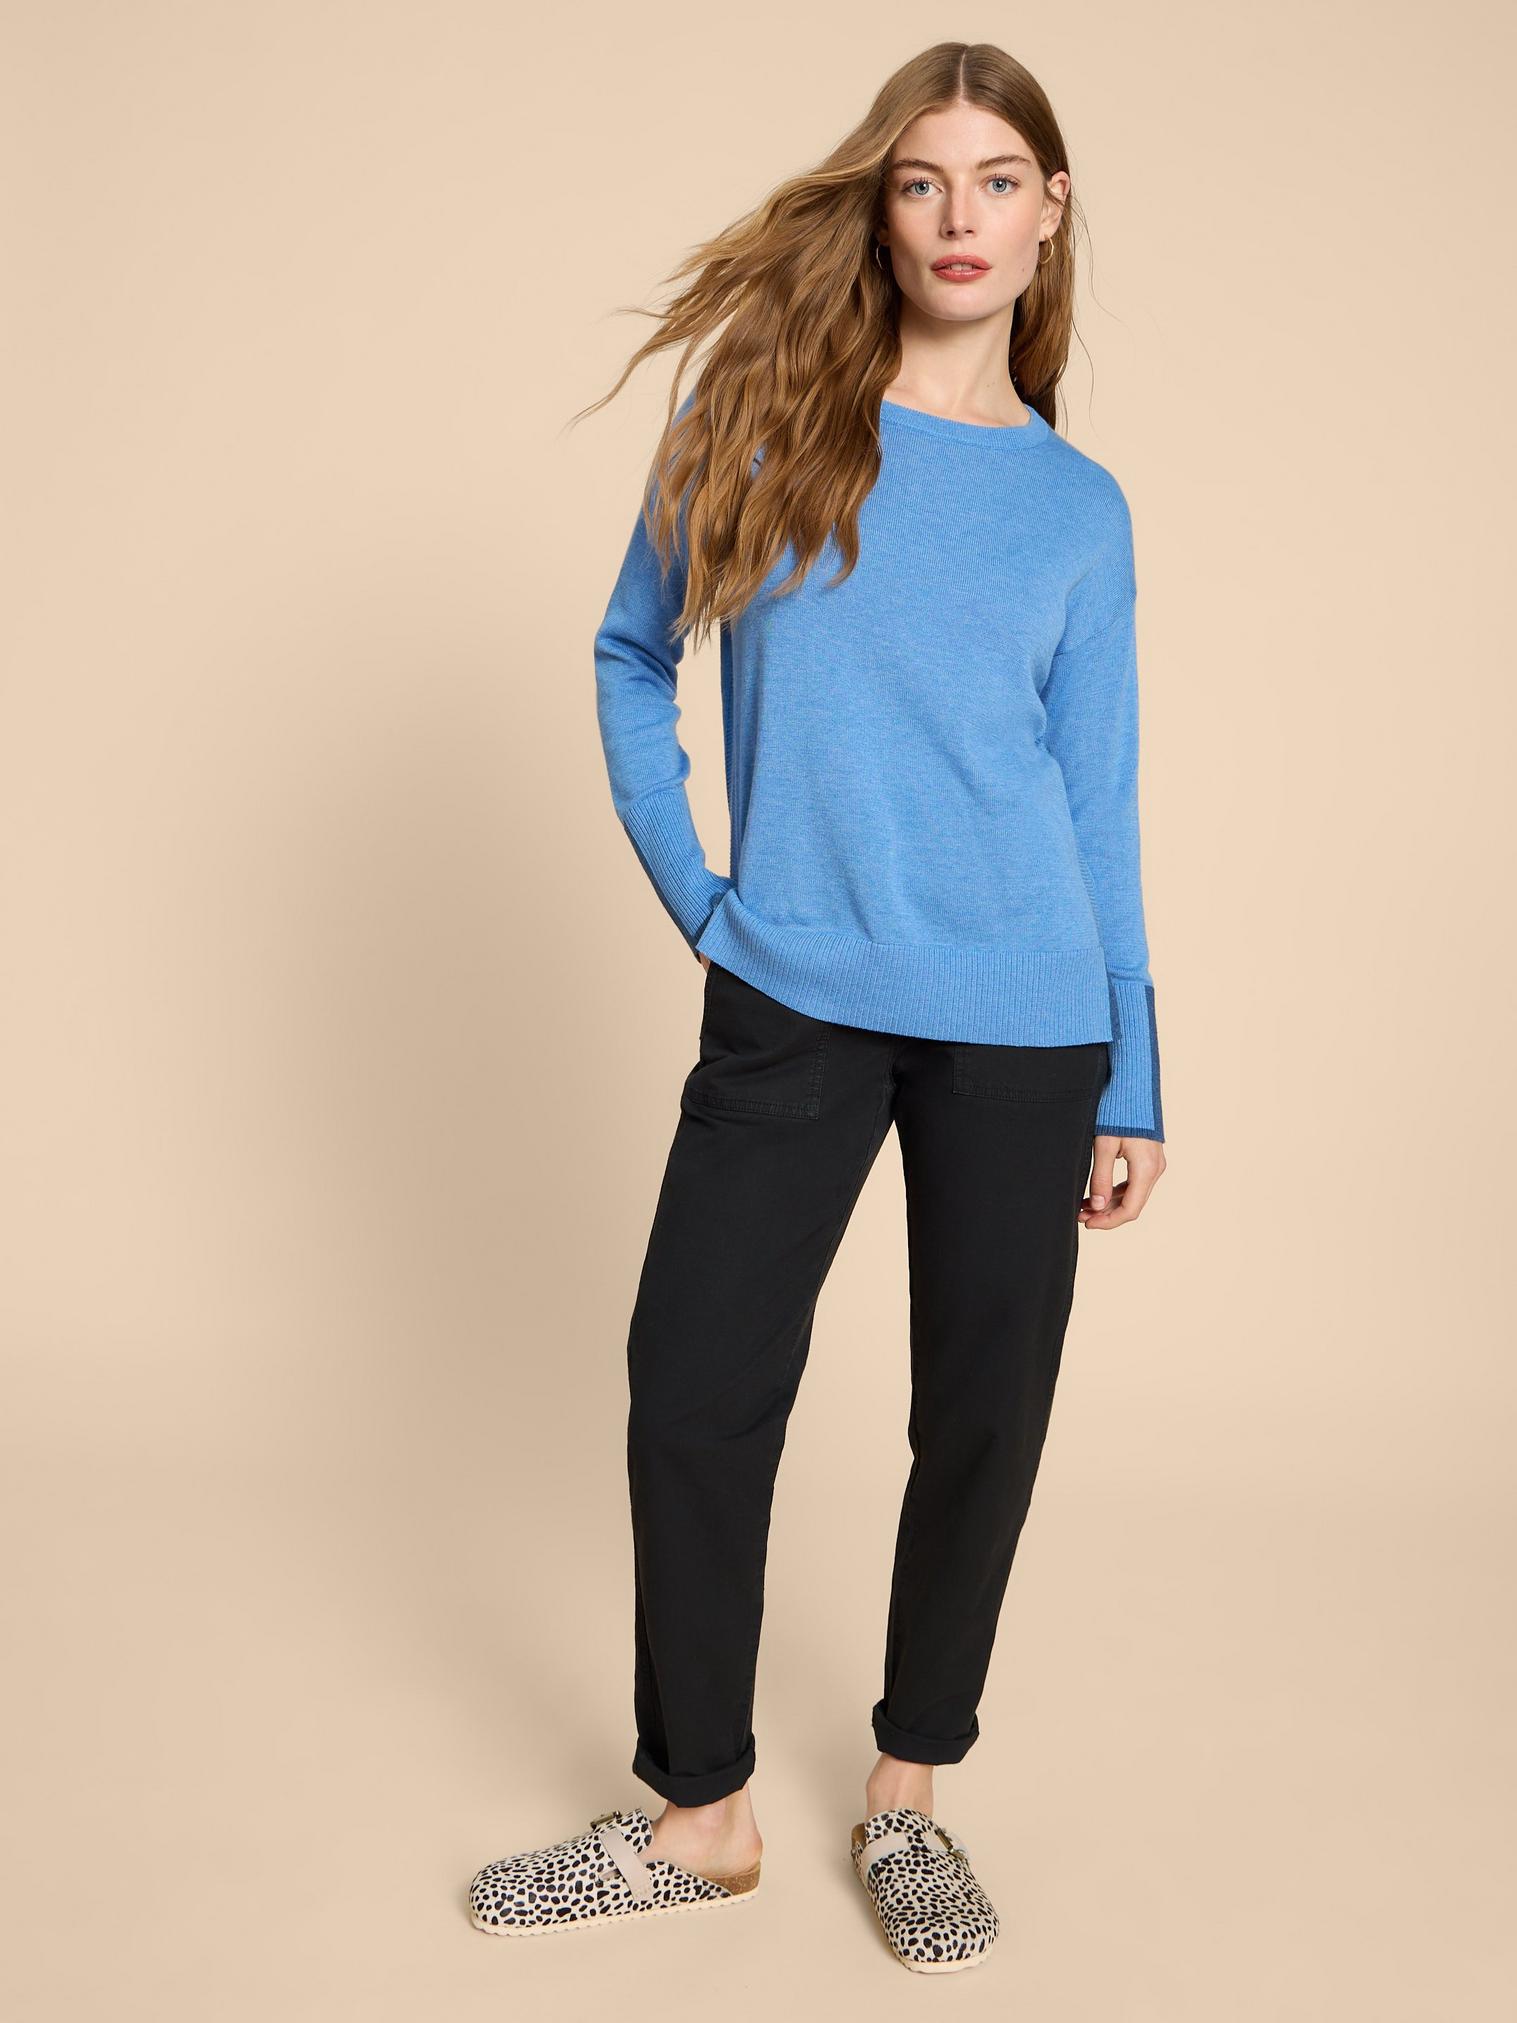 OLIVE CREW JUMPER in CHAMB BLUE - MODEL FRONT